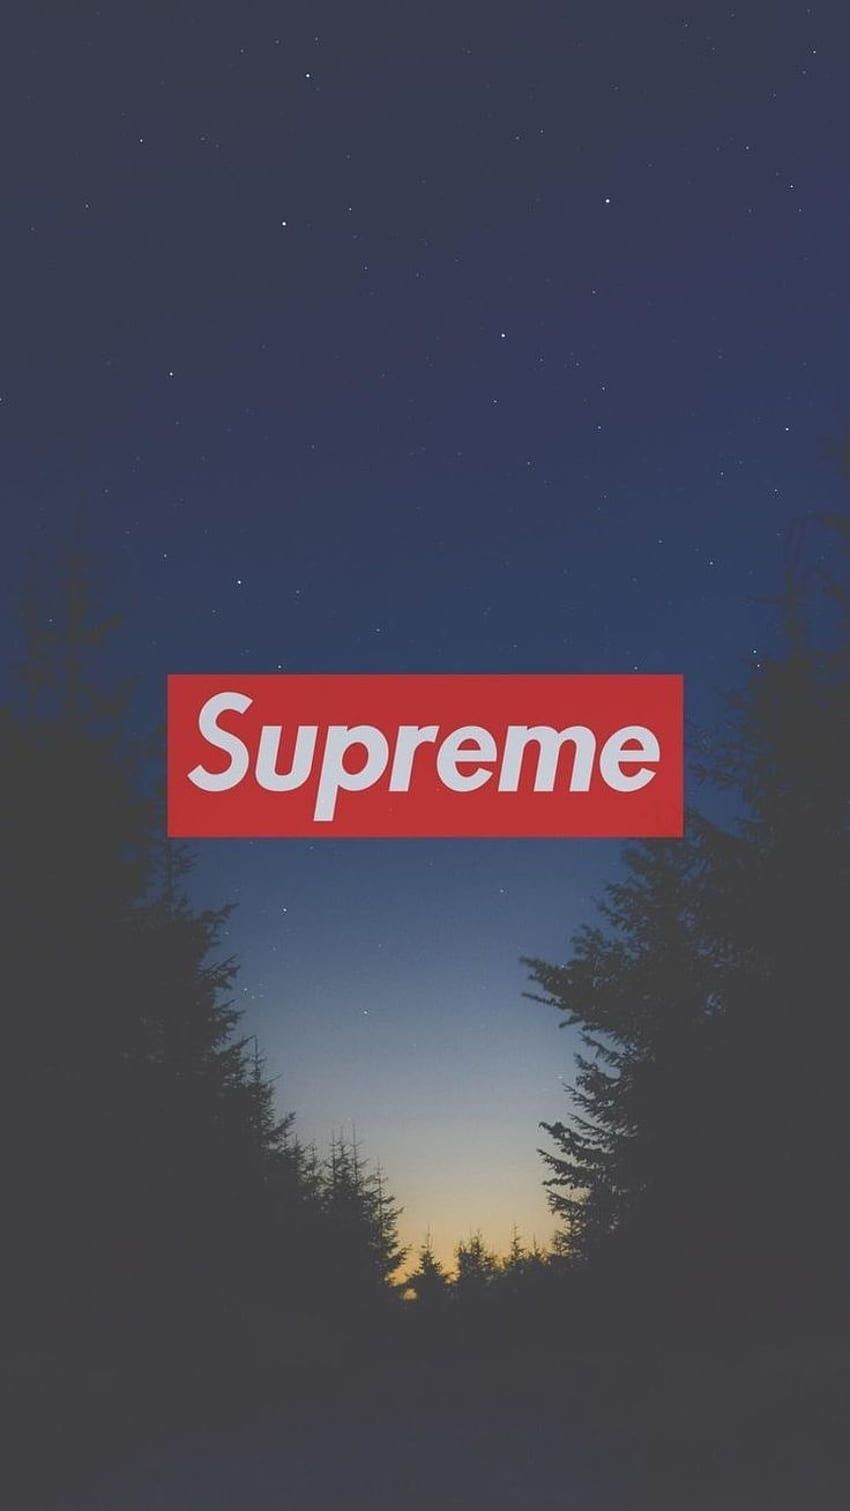 Aesthetic Supreme wallpaper with tags: hypebeast, supreme, and aesthetic. - Supreme